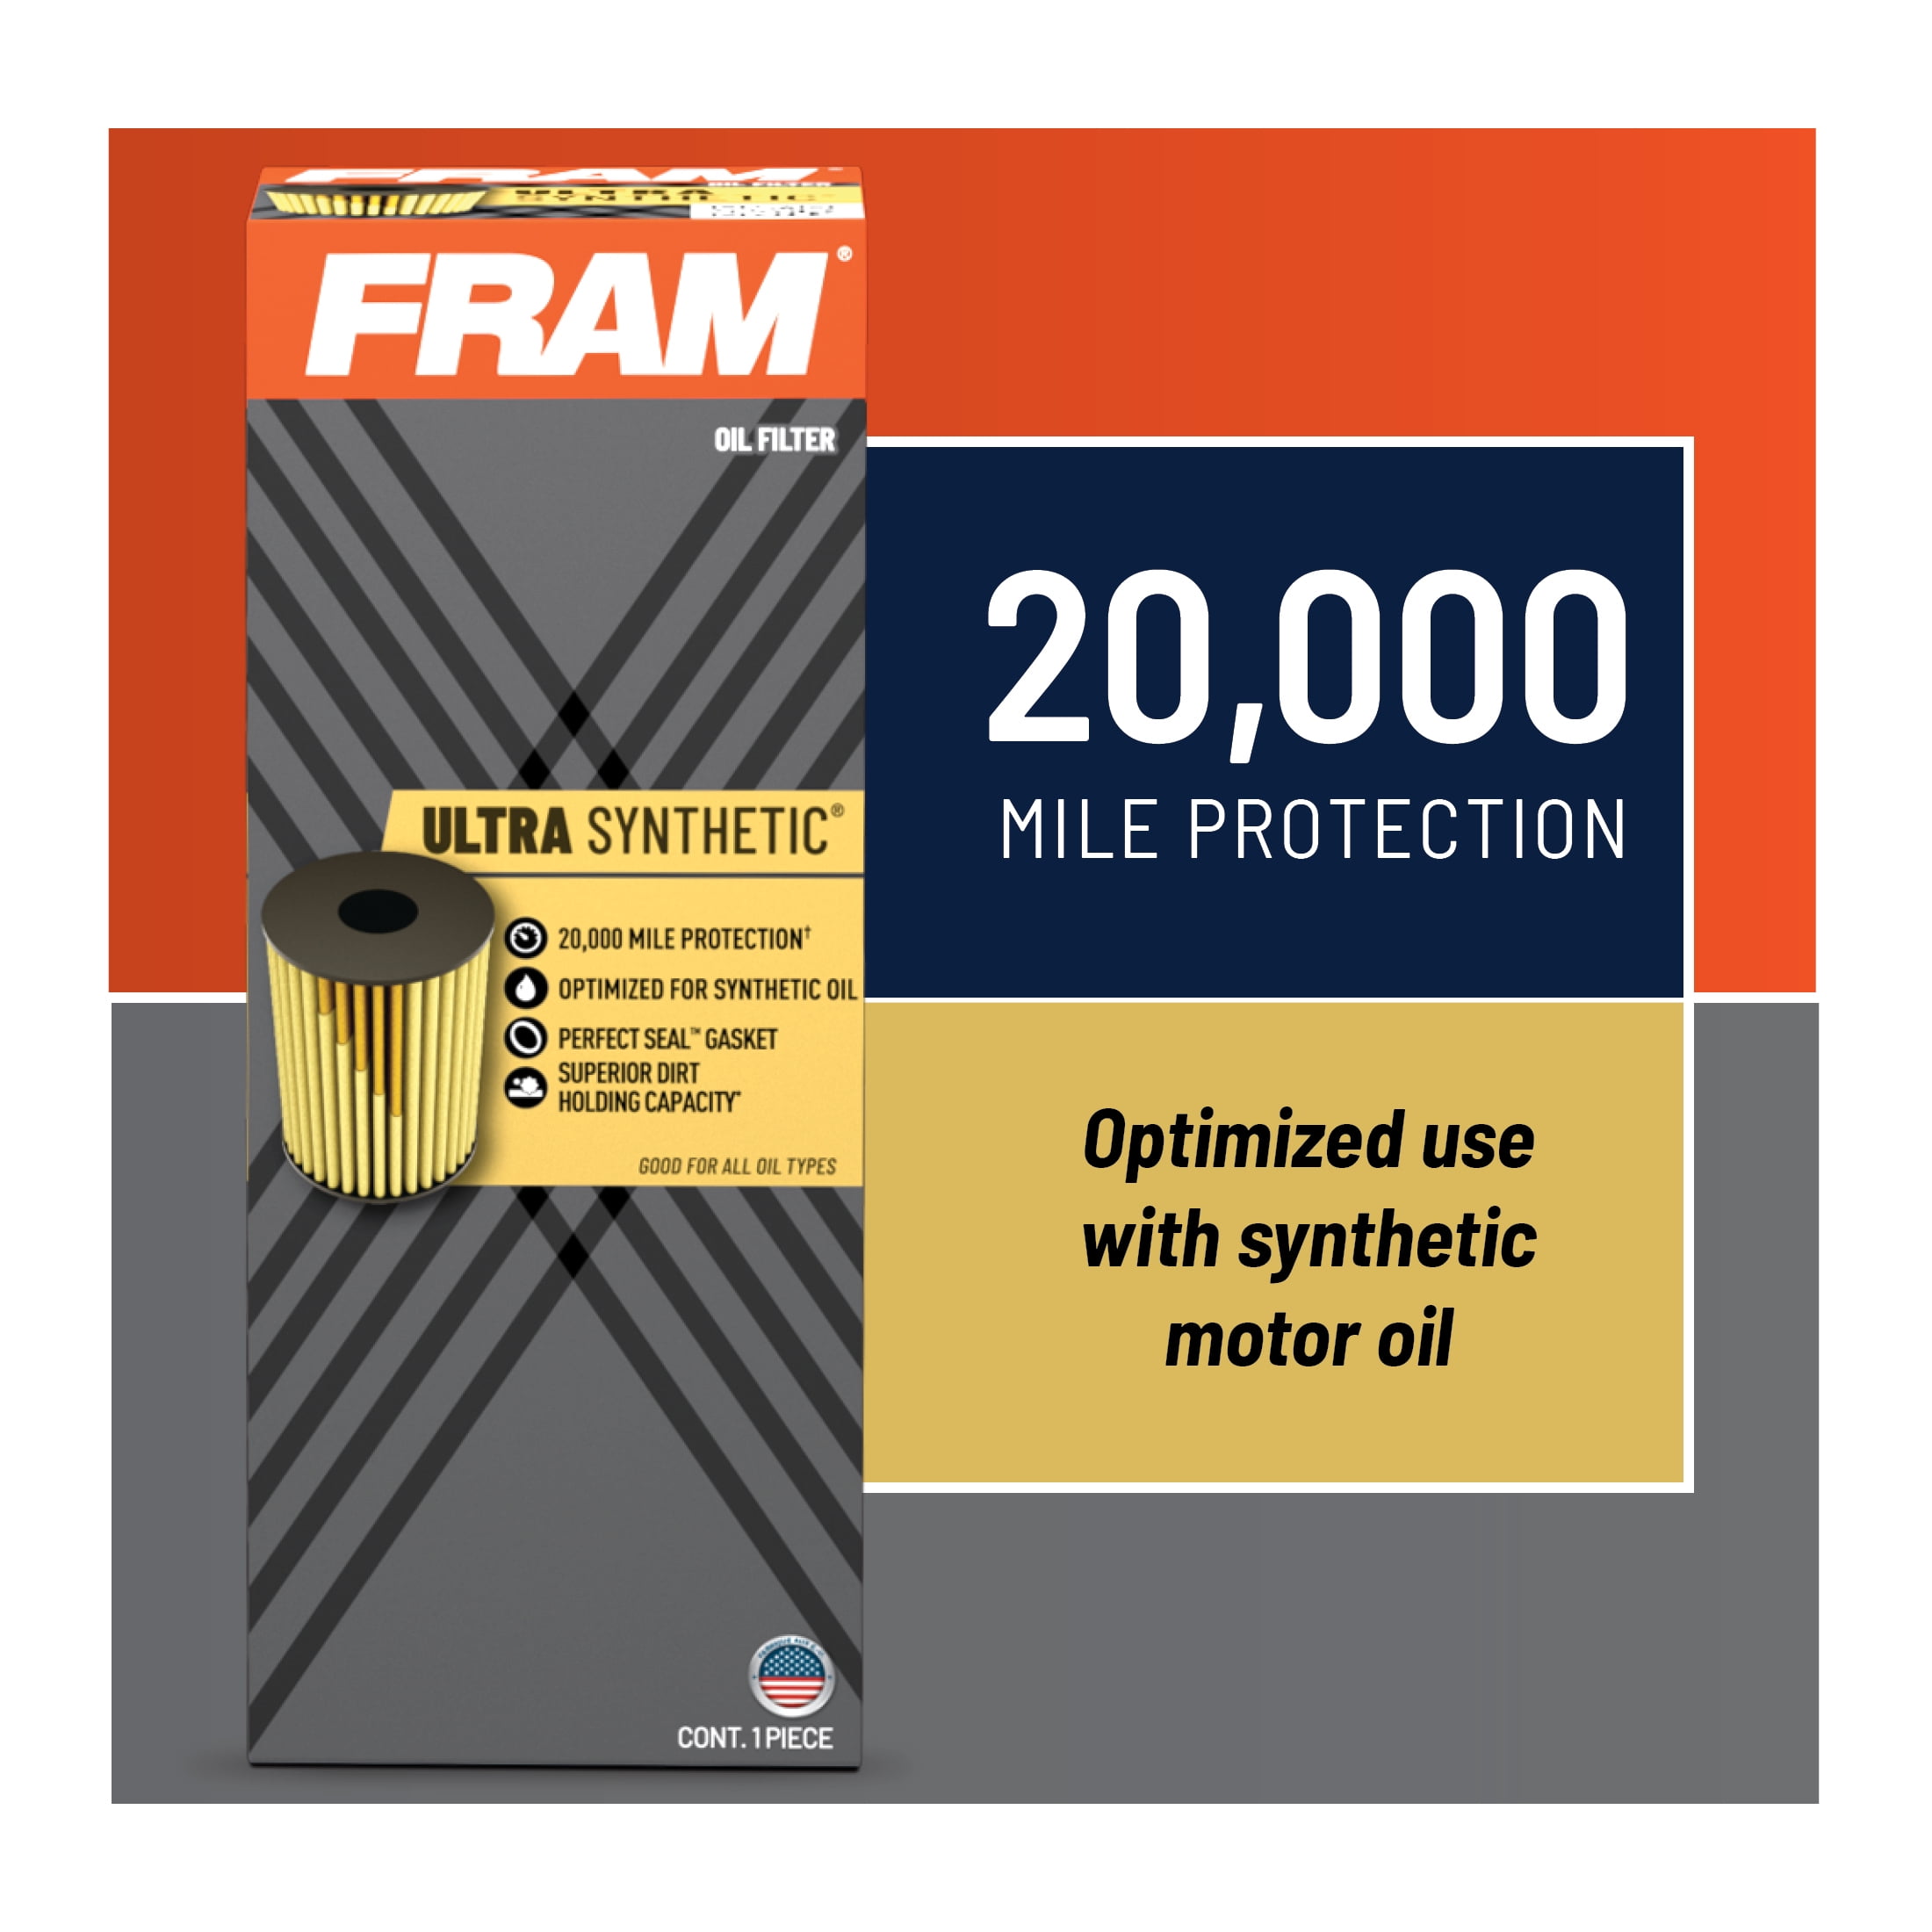 Pack of 1 FRAM Ultra Synthetic 20,000 Mile Protection Oil Filter XG9999 